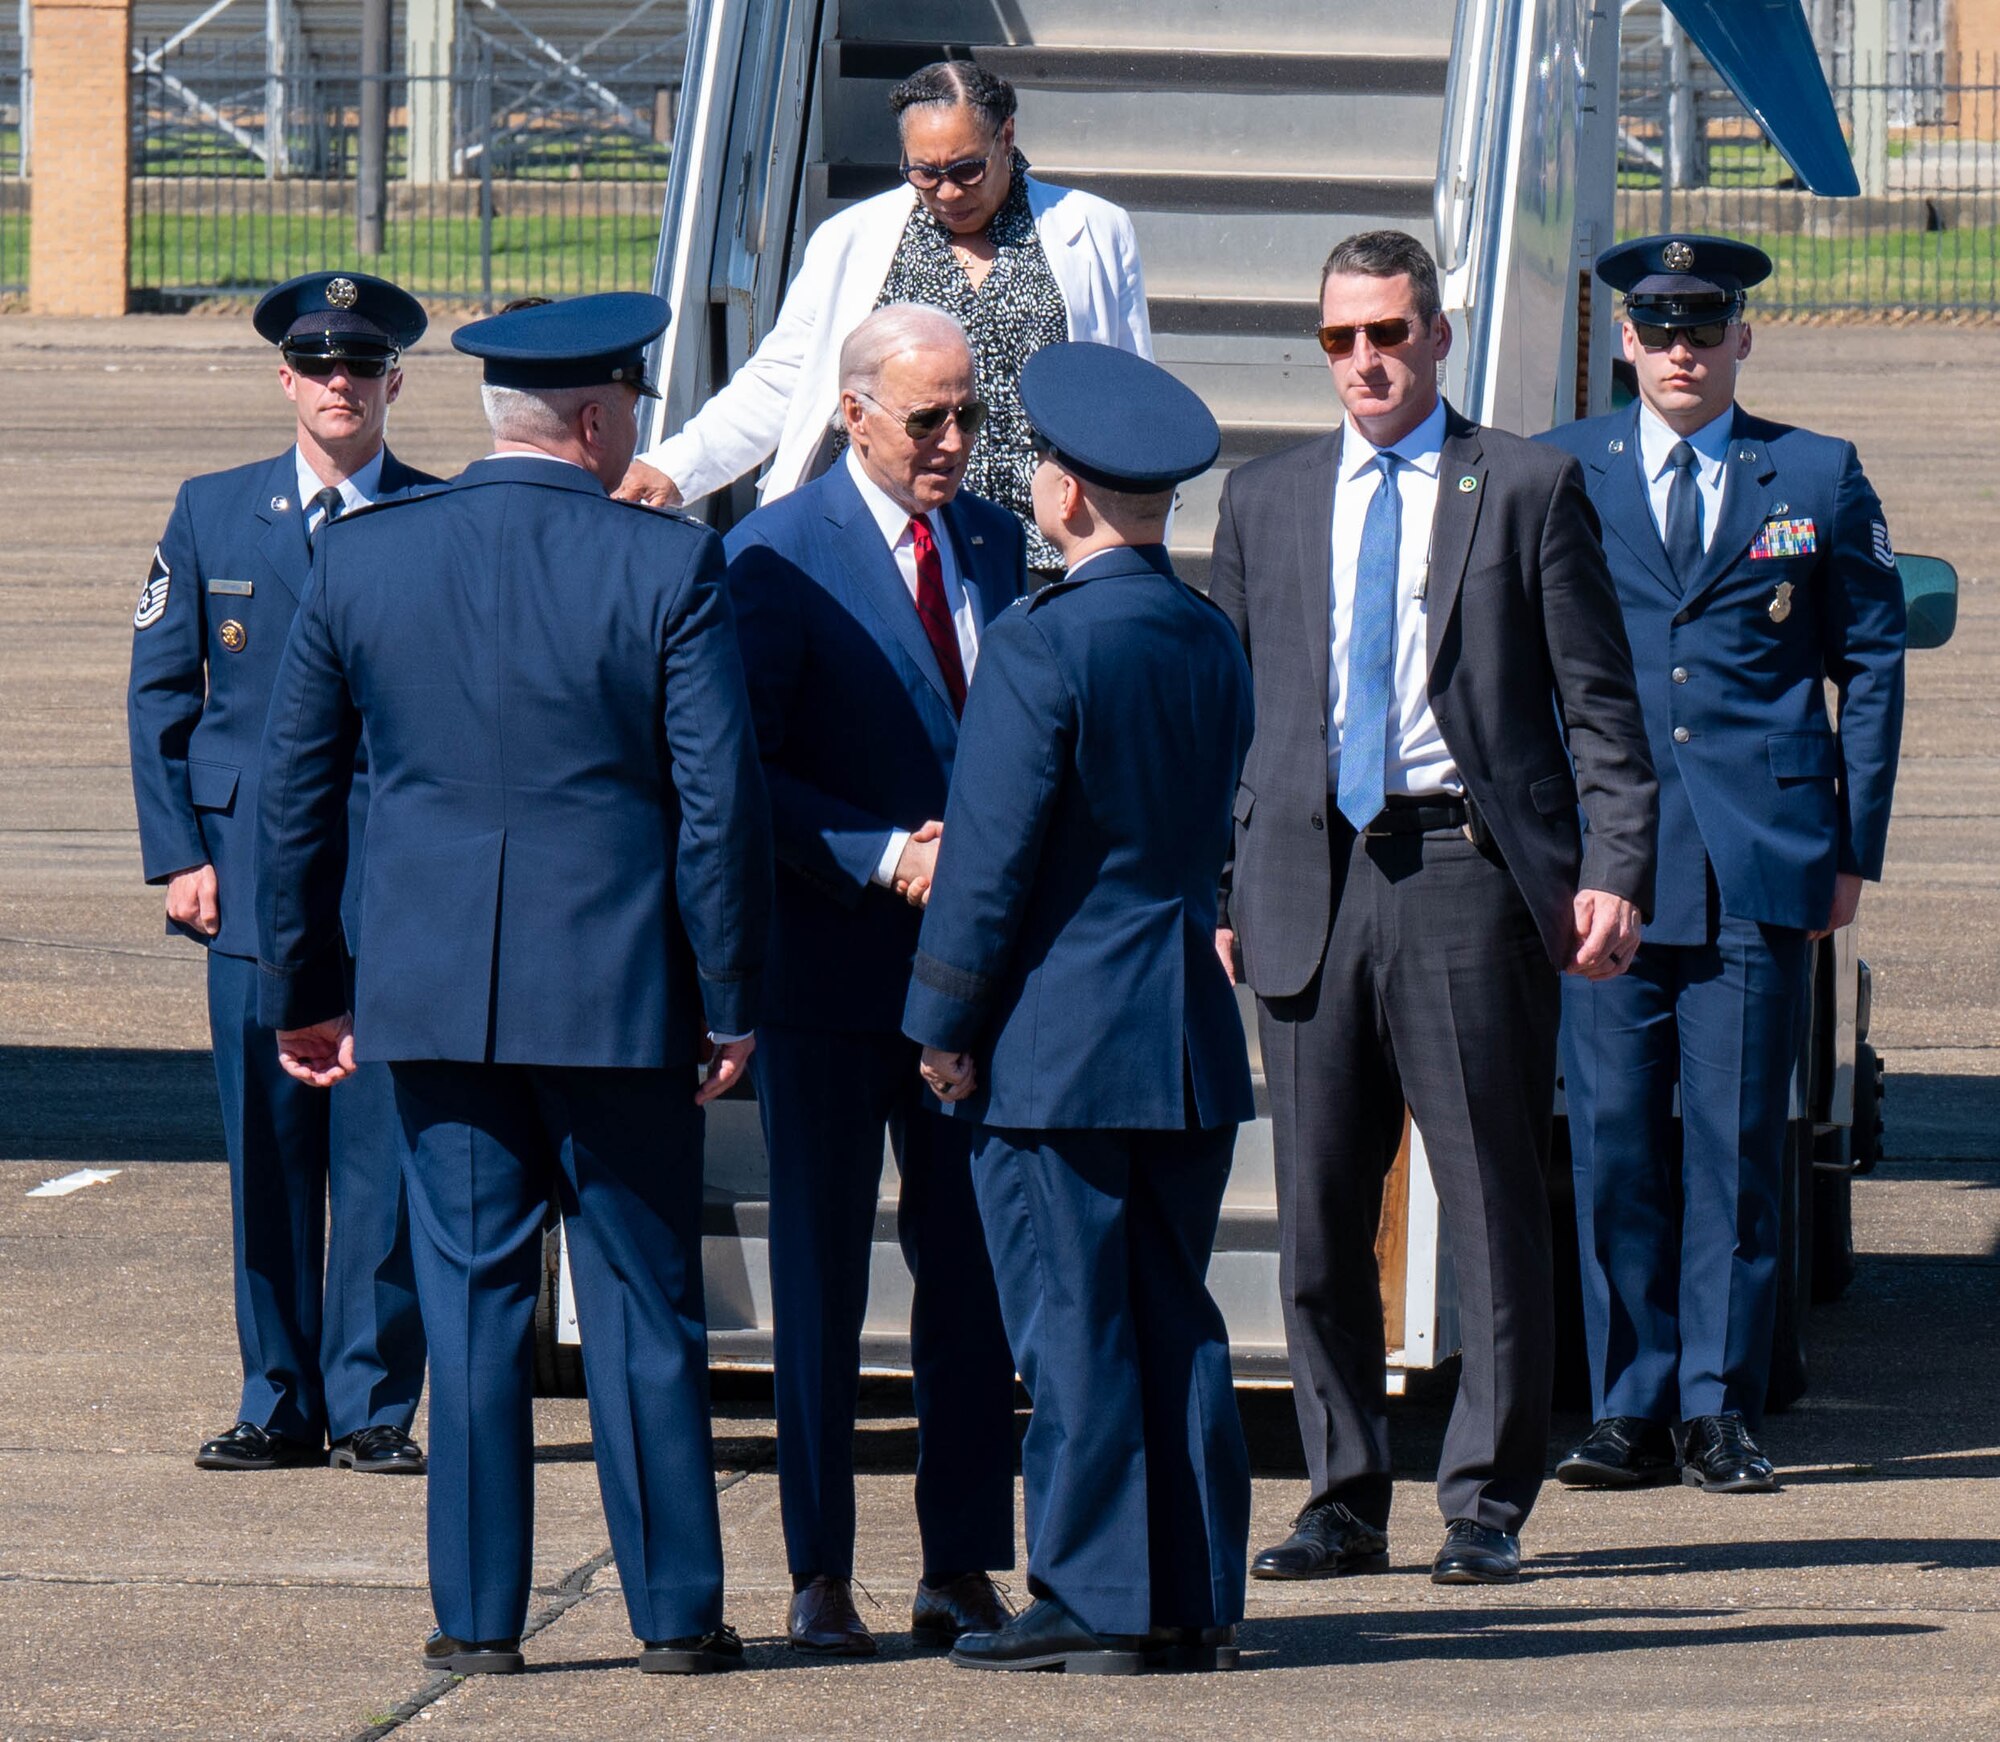 President Joe Biden greets Maj. Gen. William Holt and Col. Christopher Ledford at Maxwell Air Force Base, Mar. 5, 2023. Biden arrived at Maxwell en route to Selma to commemorate the 58th anniversary of Bloody Sunday.